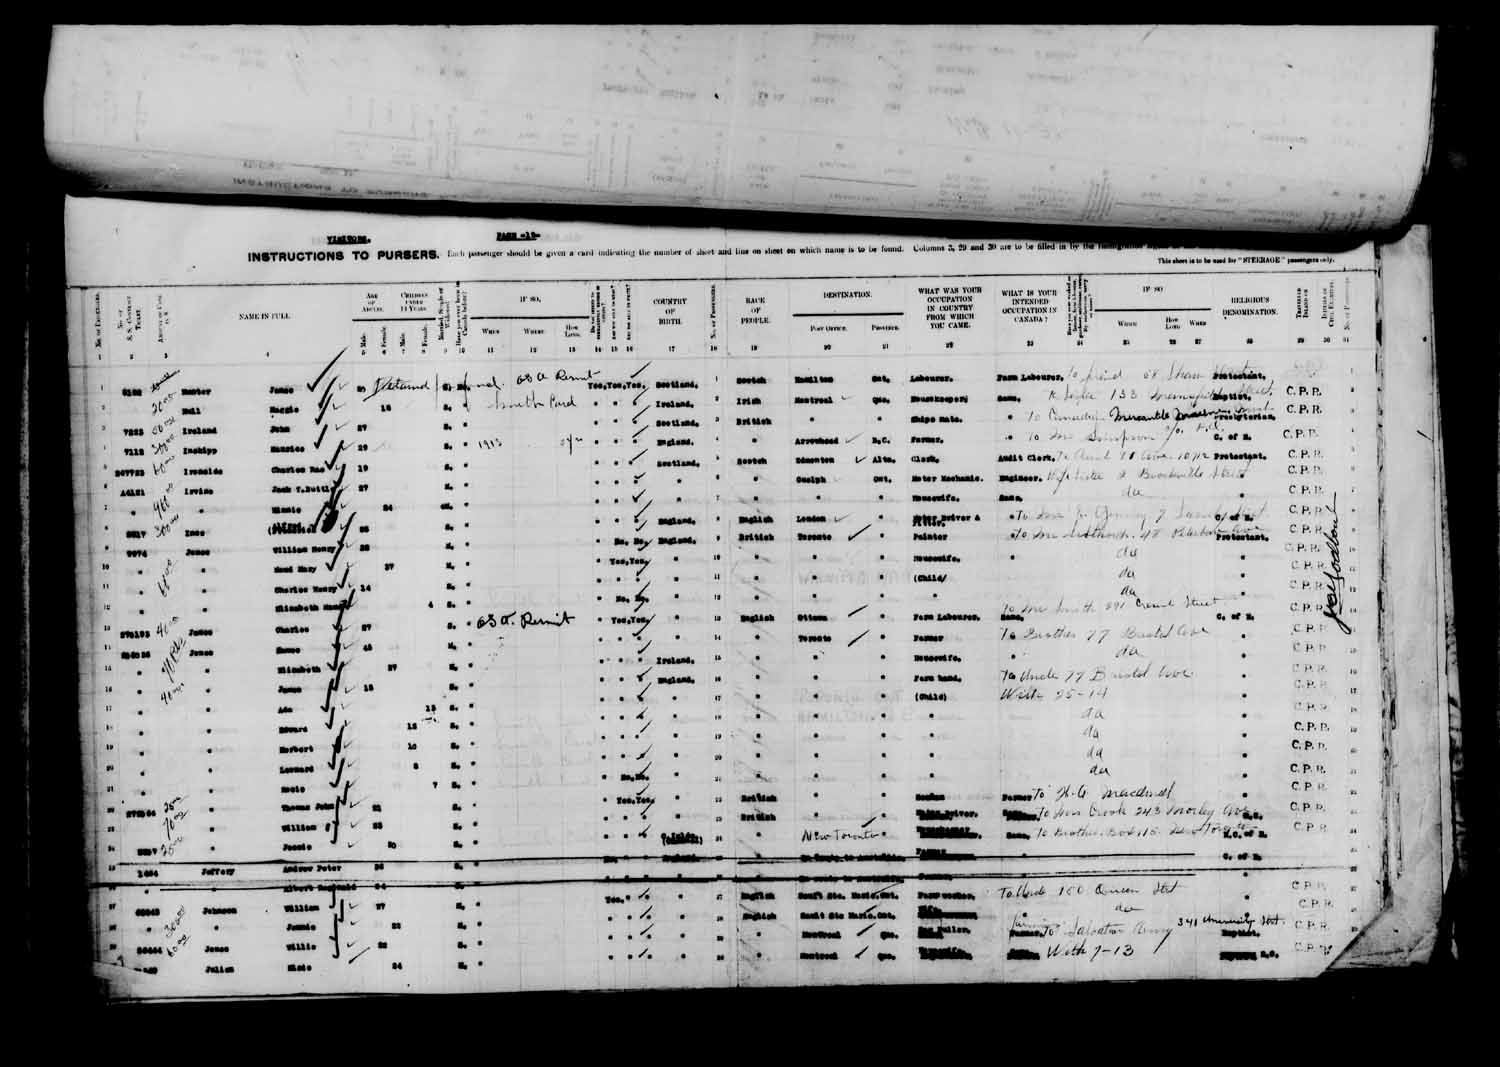 Digitized page of Passenger Lists for Image No.: e003610652